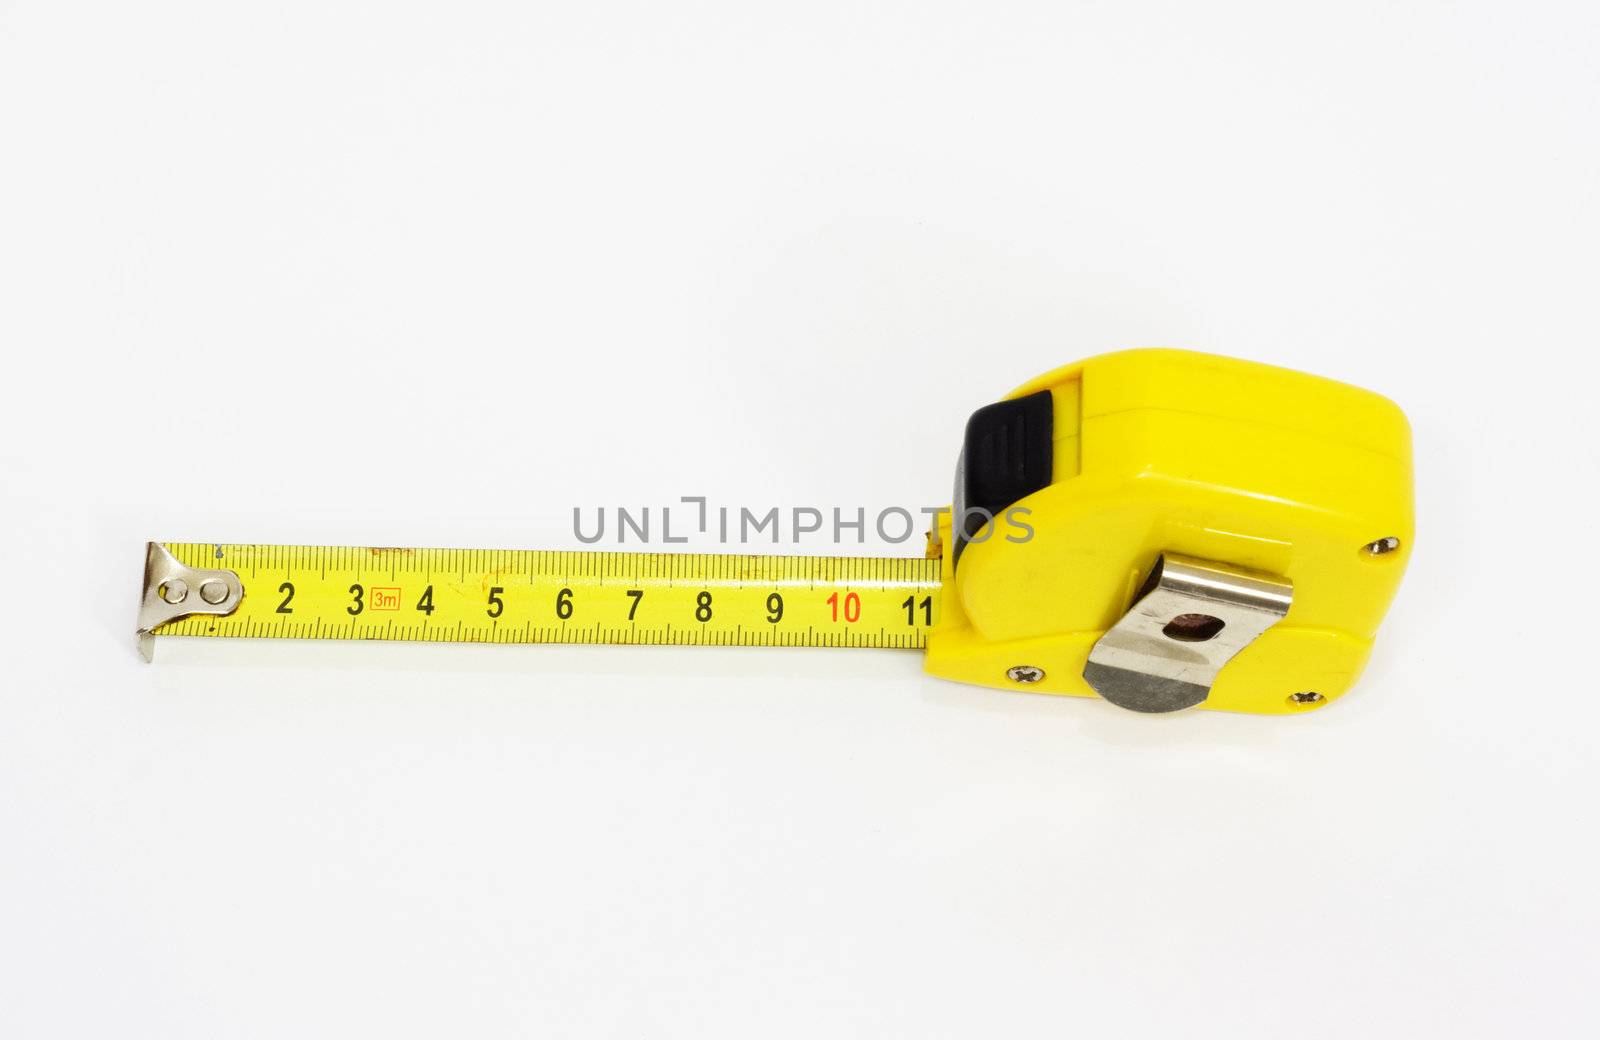 roll-up tape measure isolated on a white background  by schankz